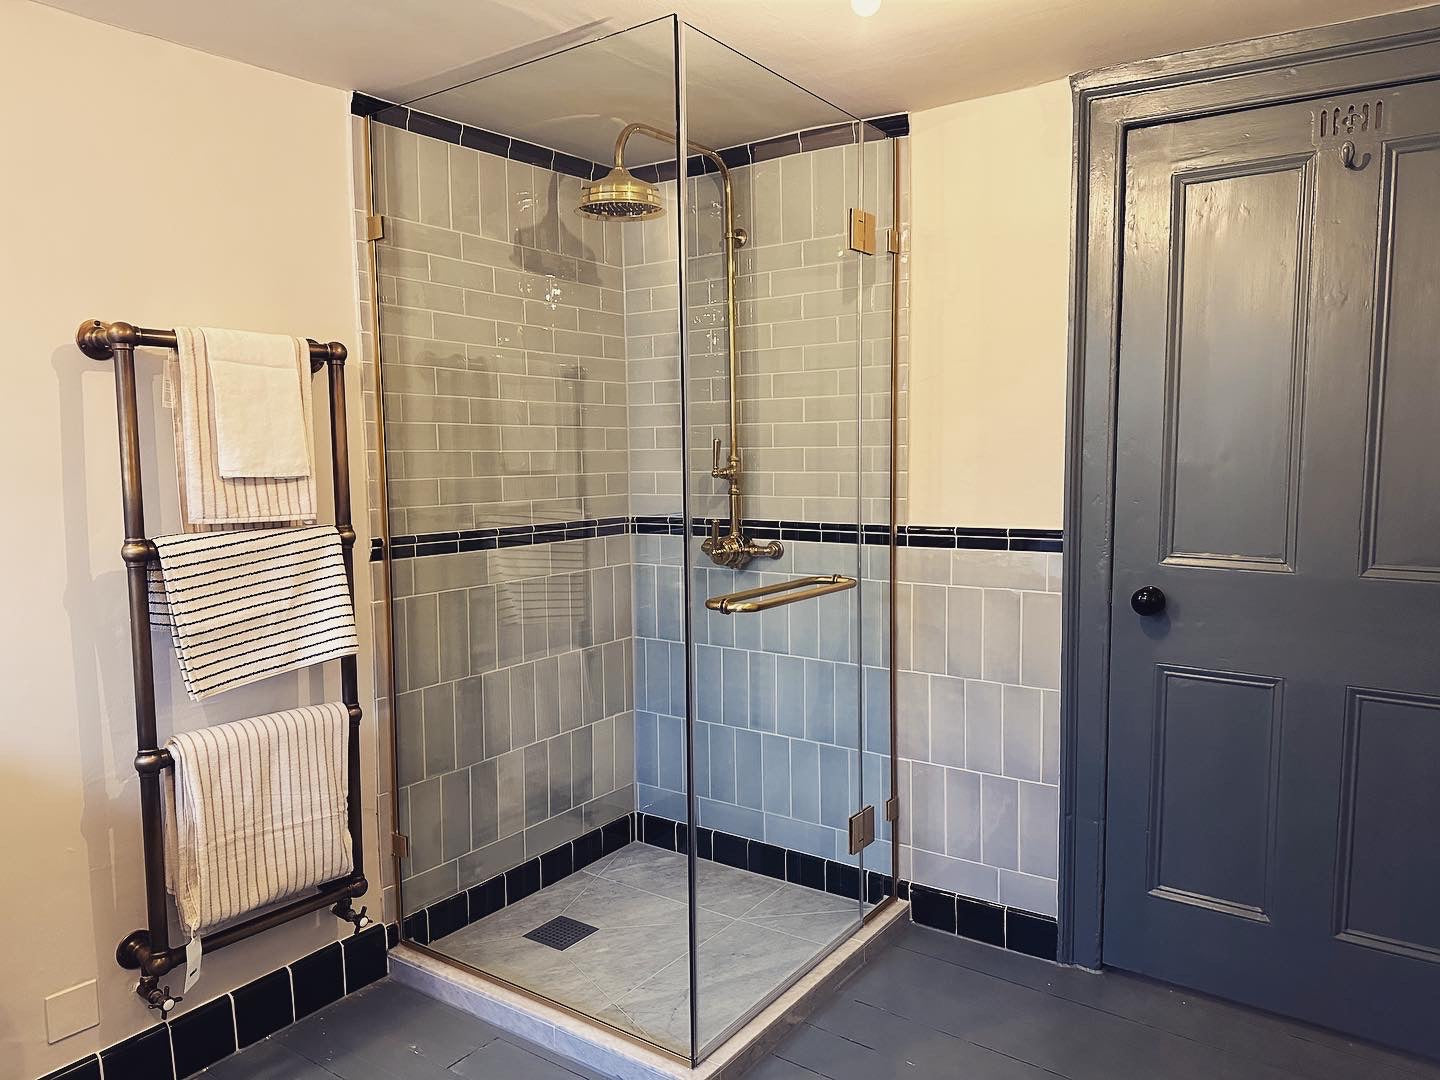 Bespoke shower glass enclosure constructed using satin brass components and hardware